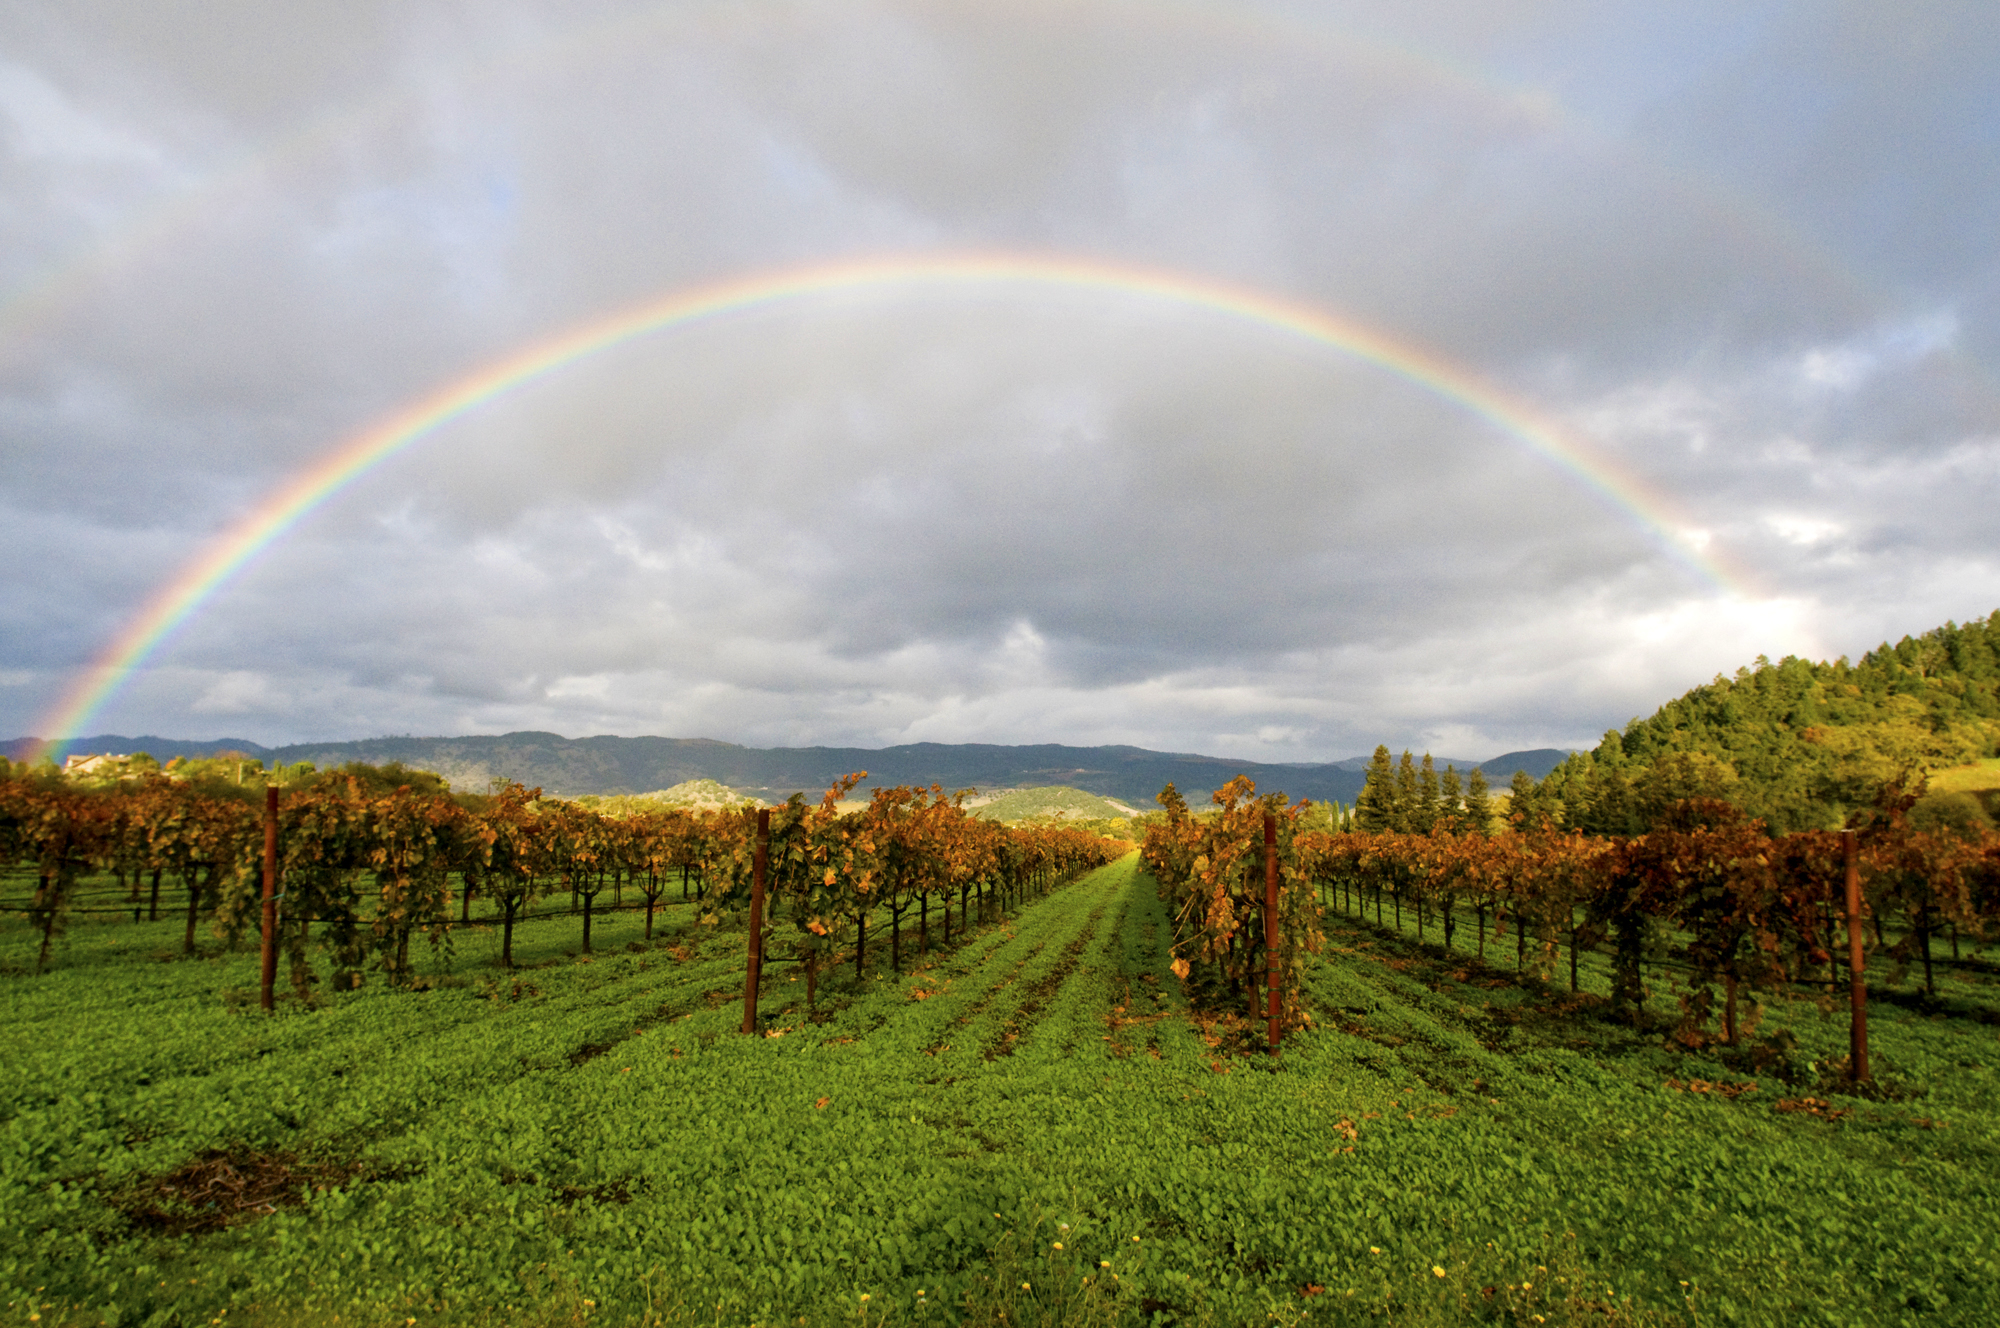 Rainbow Nature Photography Class with Art & Clarity in Napa